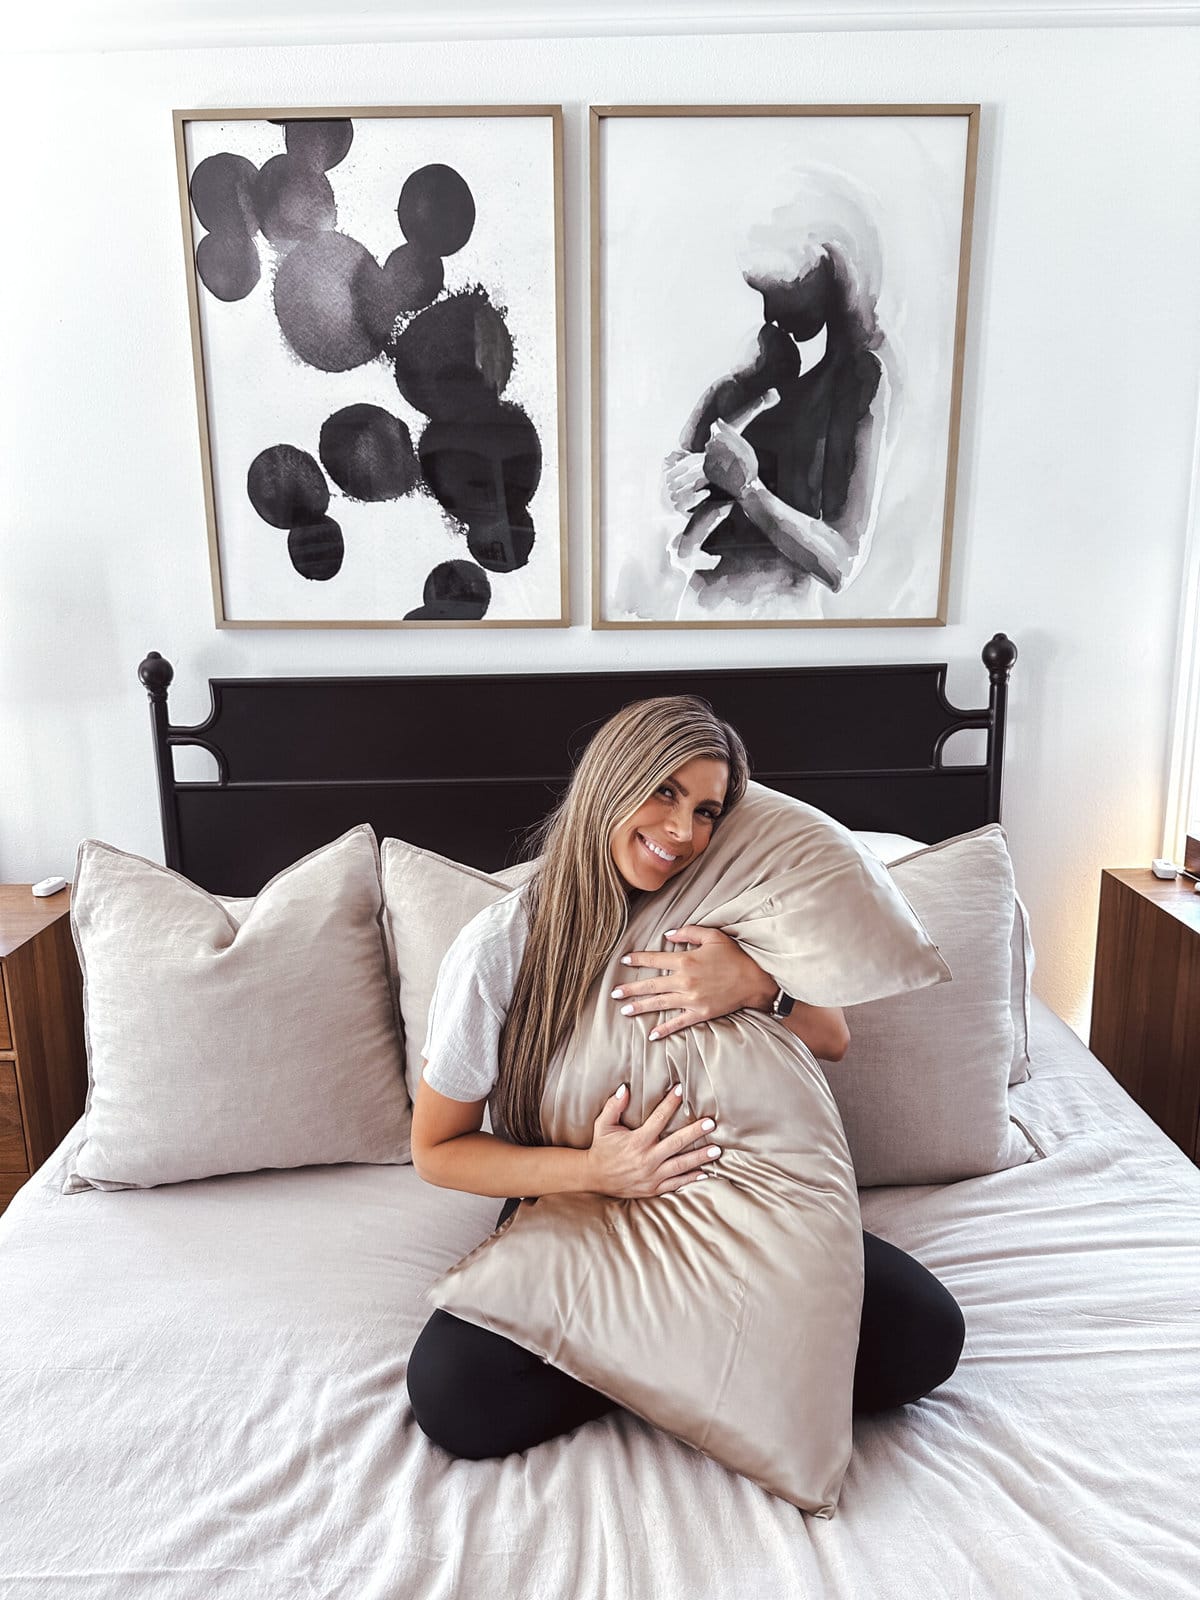 Coop Pillow Review 2022 - Forbes Vetted